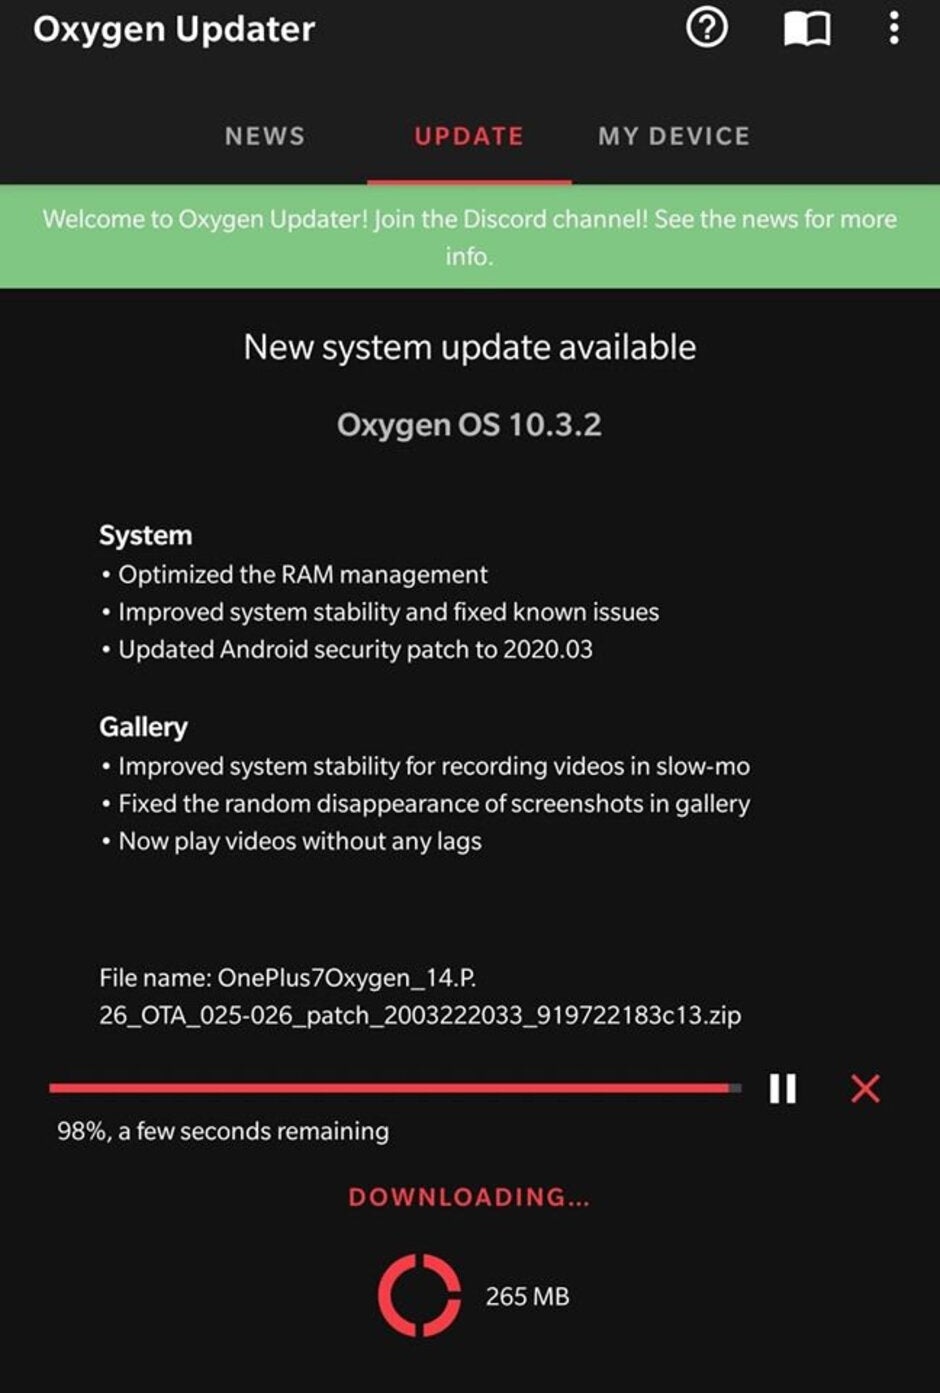 OnePlus 7/Pro getting new updates to fix issues and improve various features